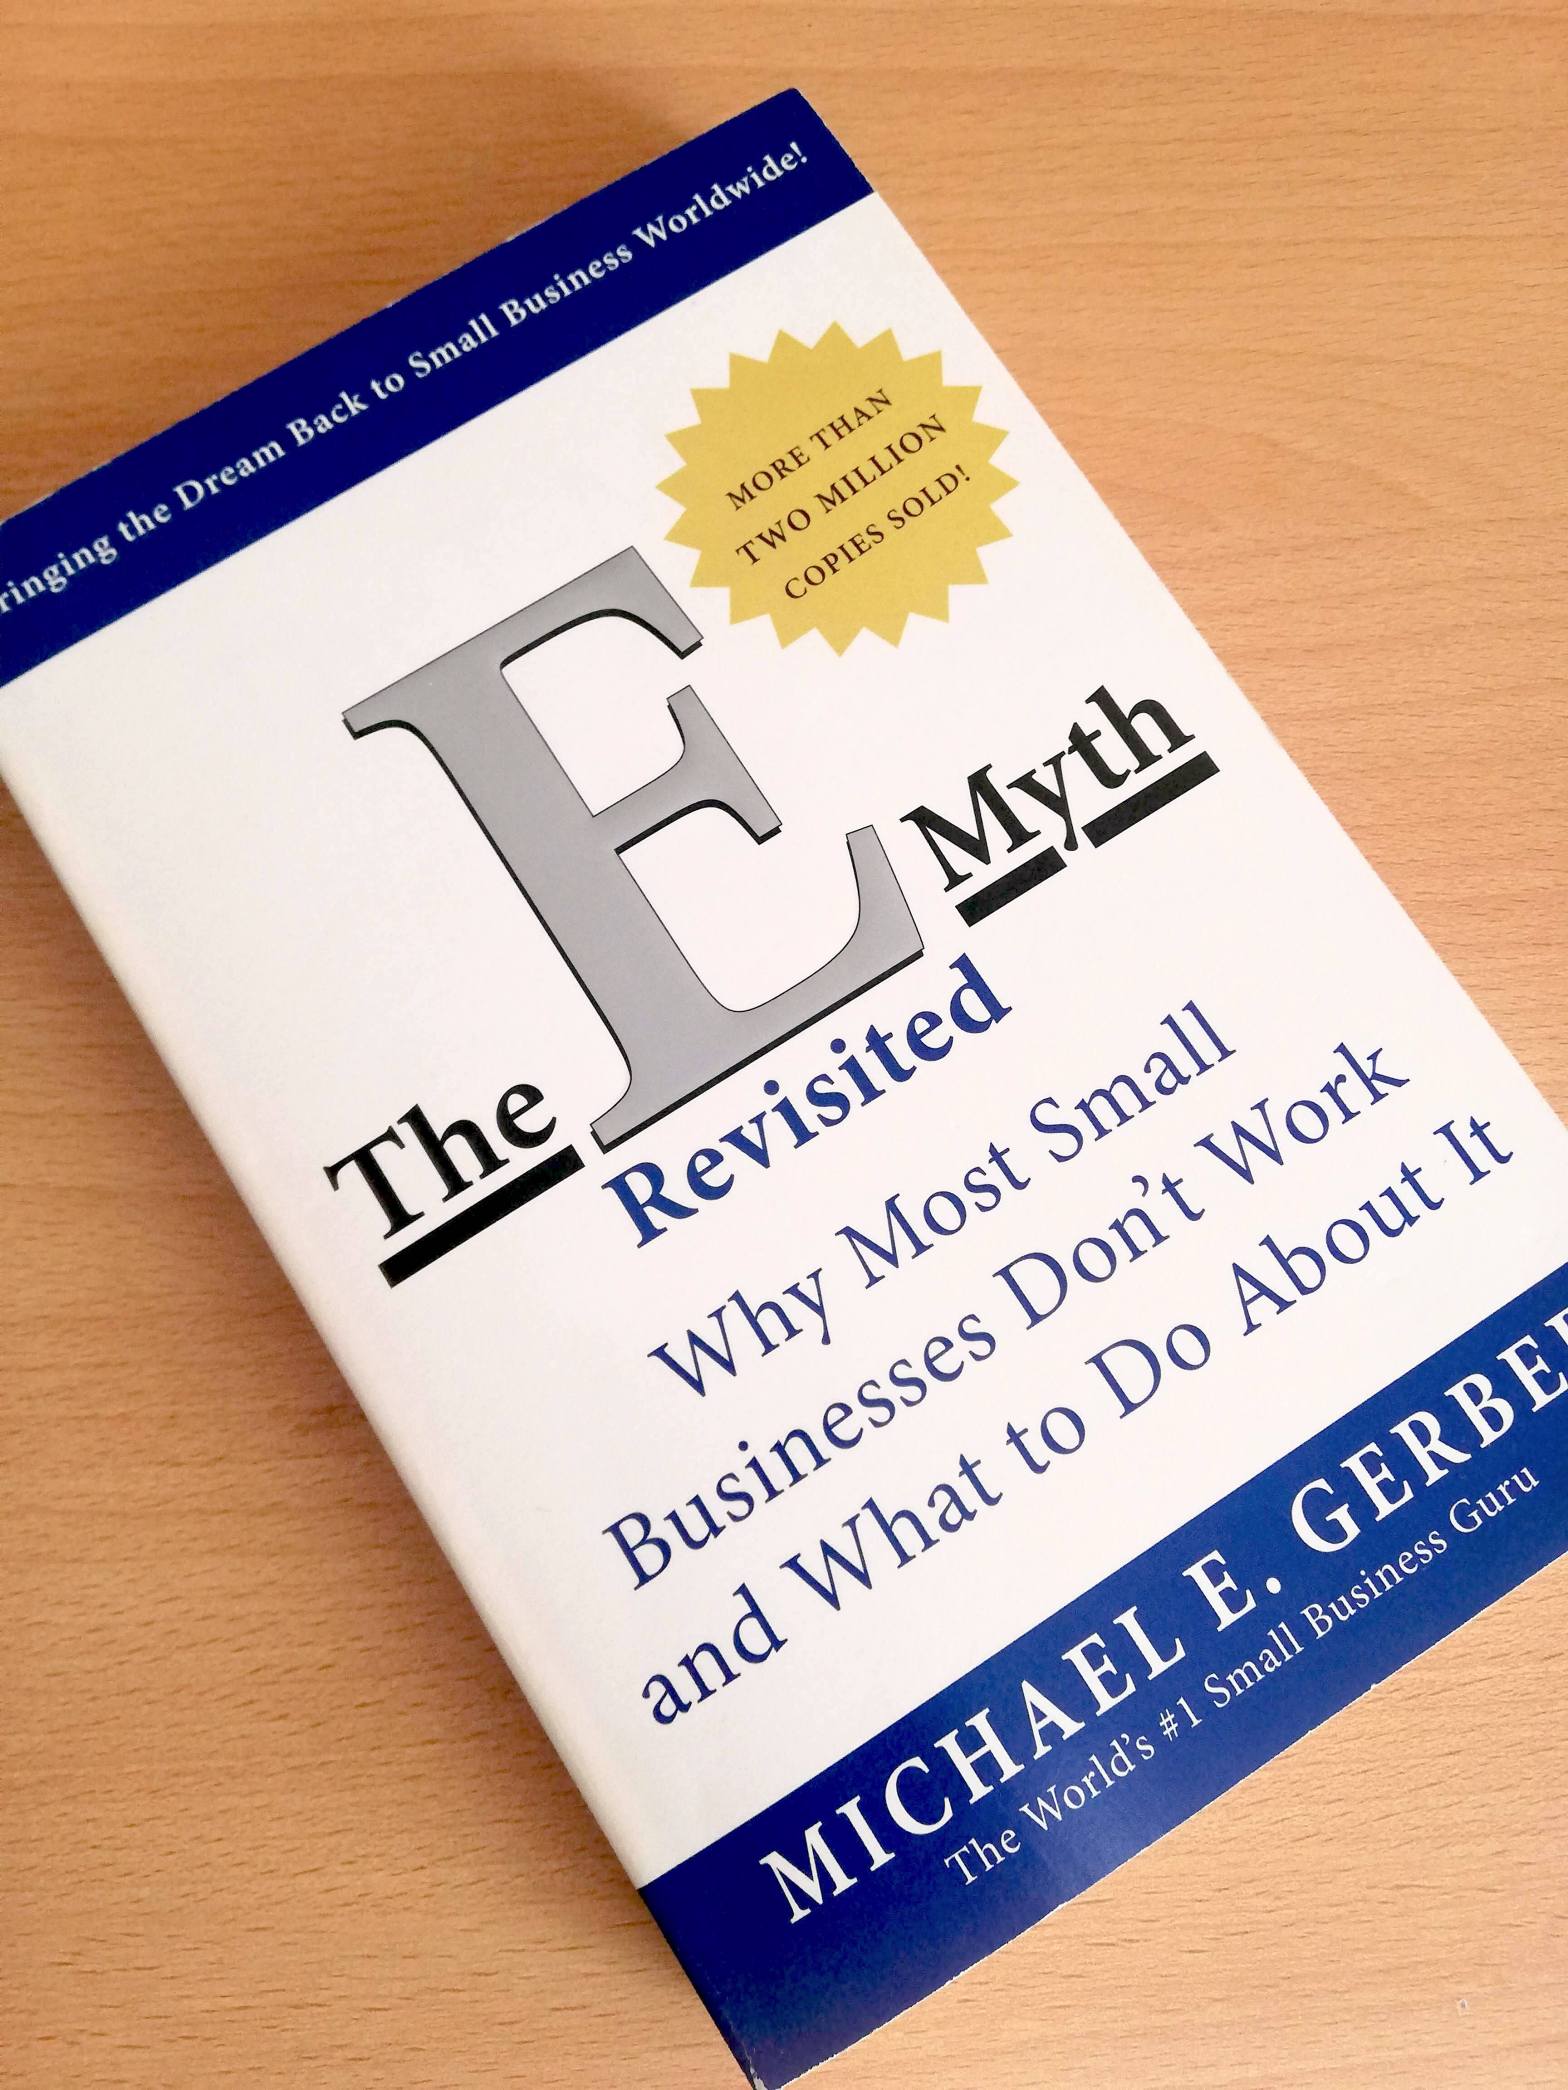 7 Best Business Books Of All Time